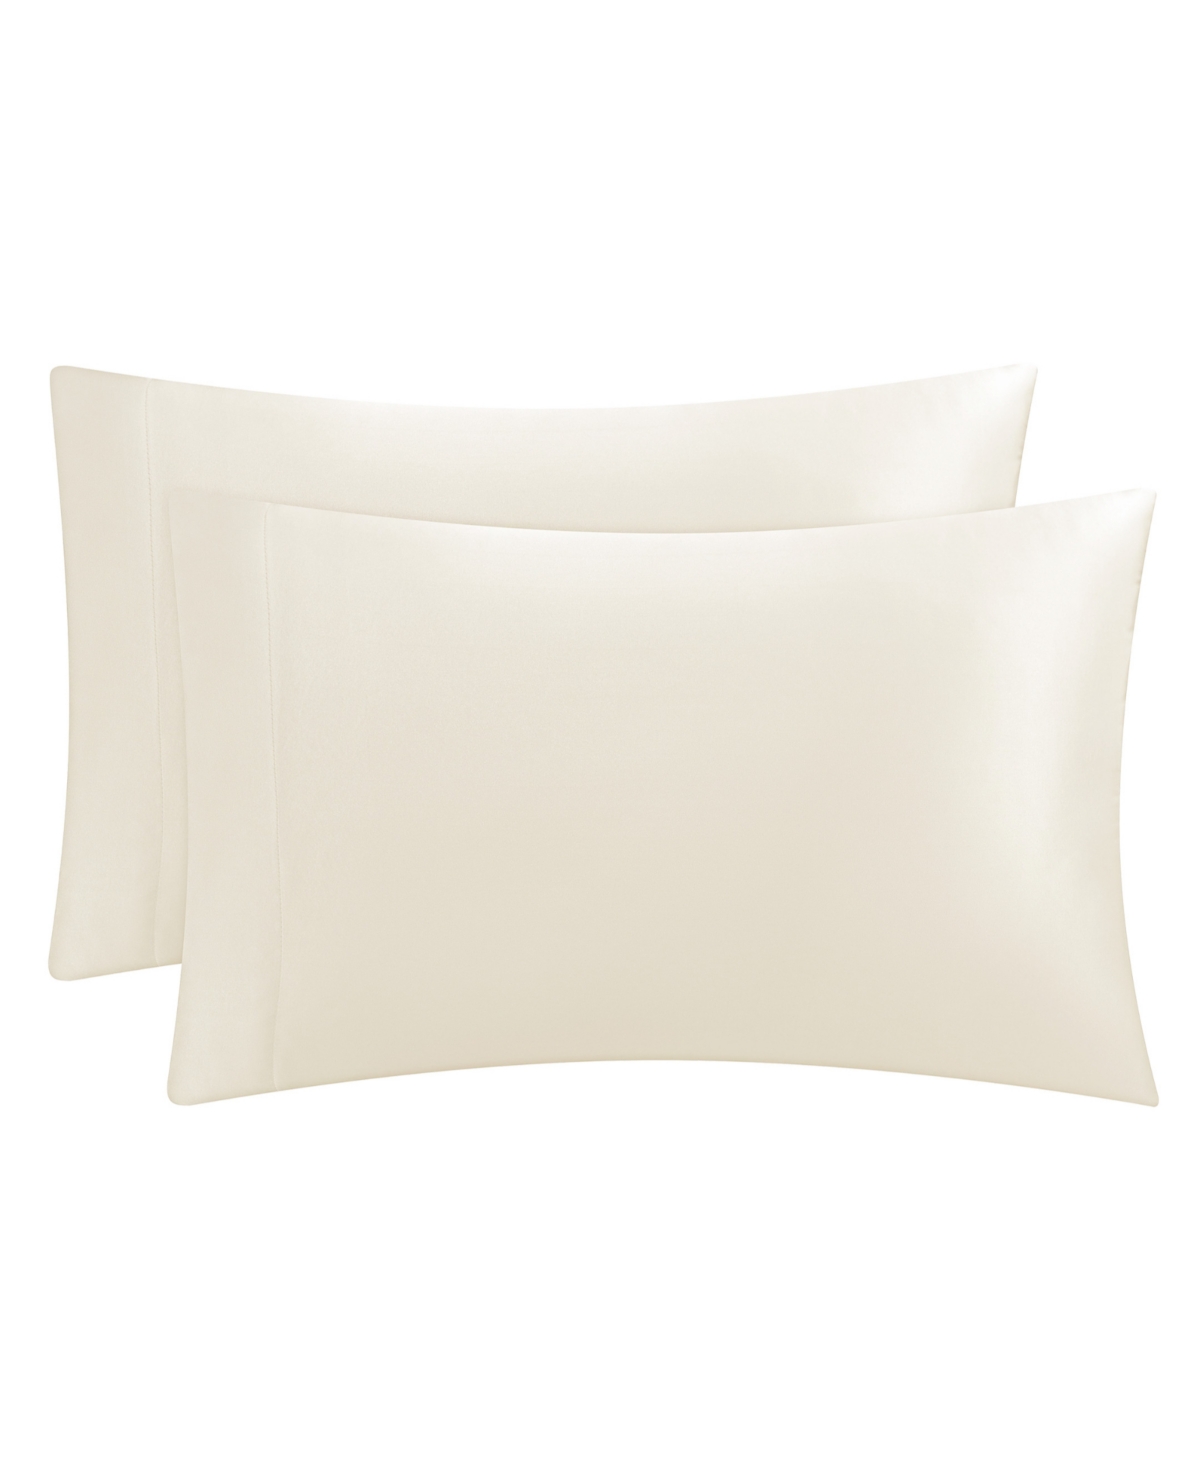 Juicy Couture Satin 2 Piece Pillow Case Set, King In Ivory